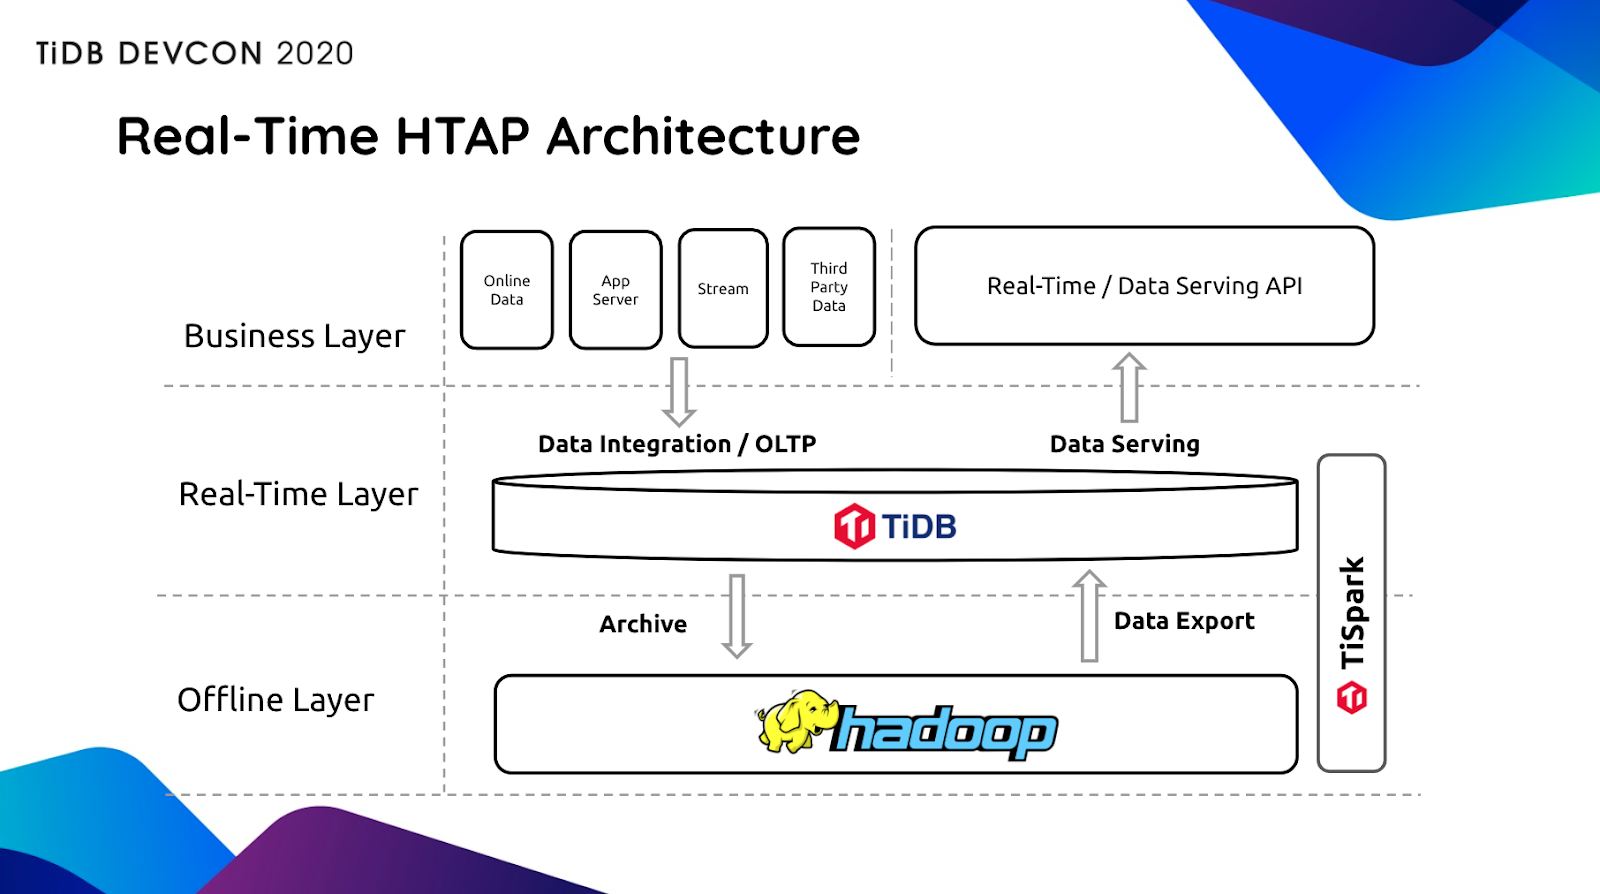 TiDB's real-time HTAP architecture